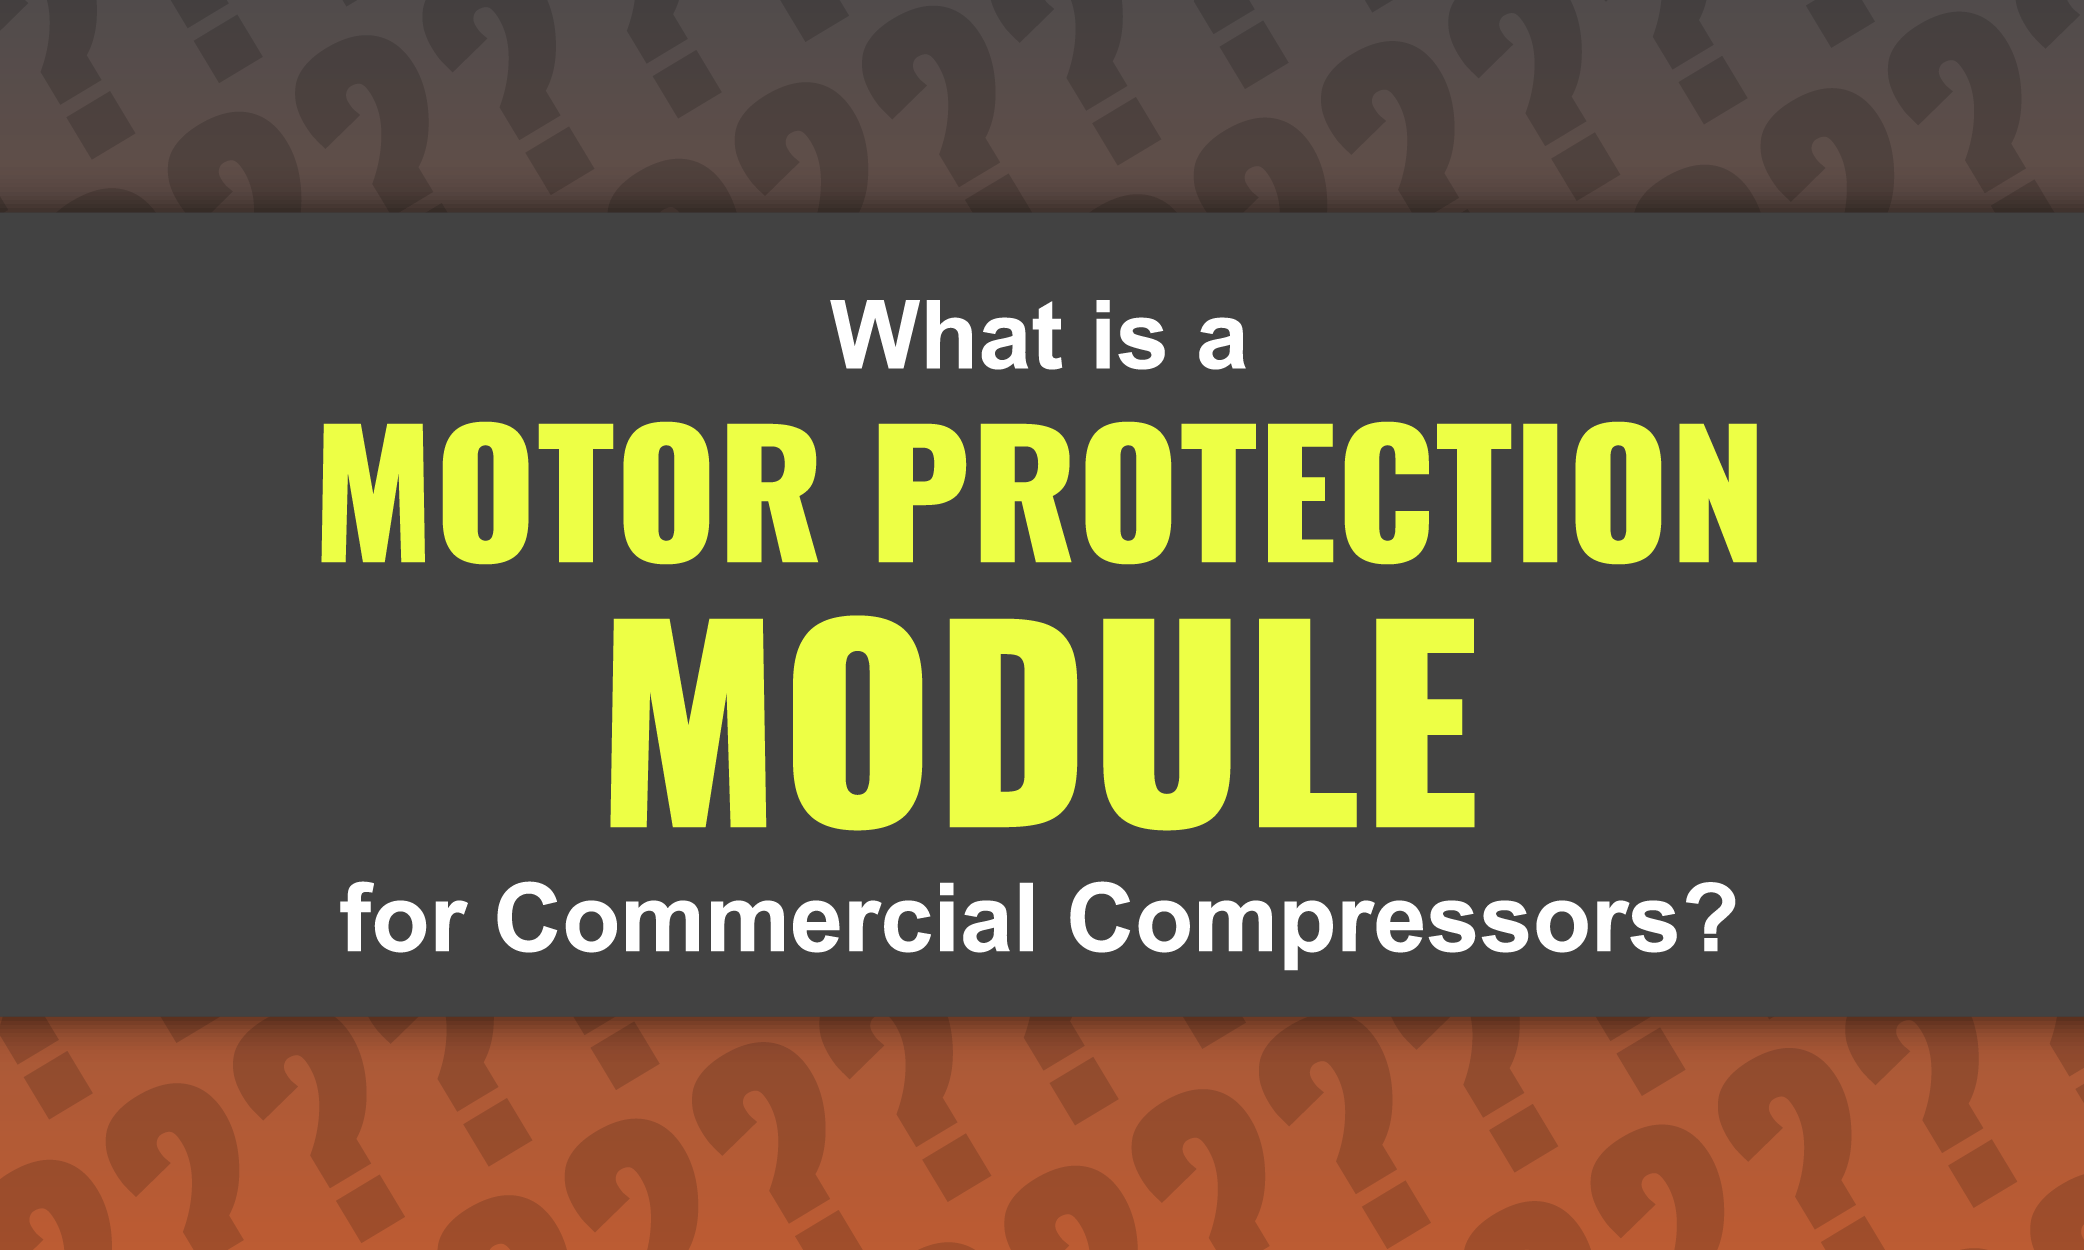 What is a Motor Protection Module for Commercial Compressors